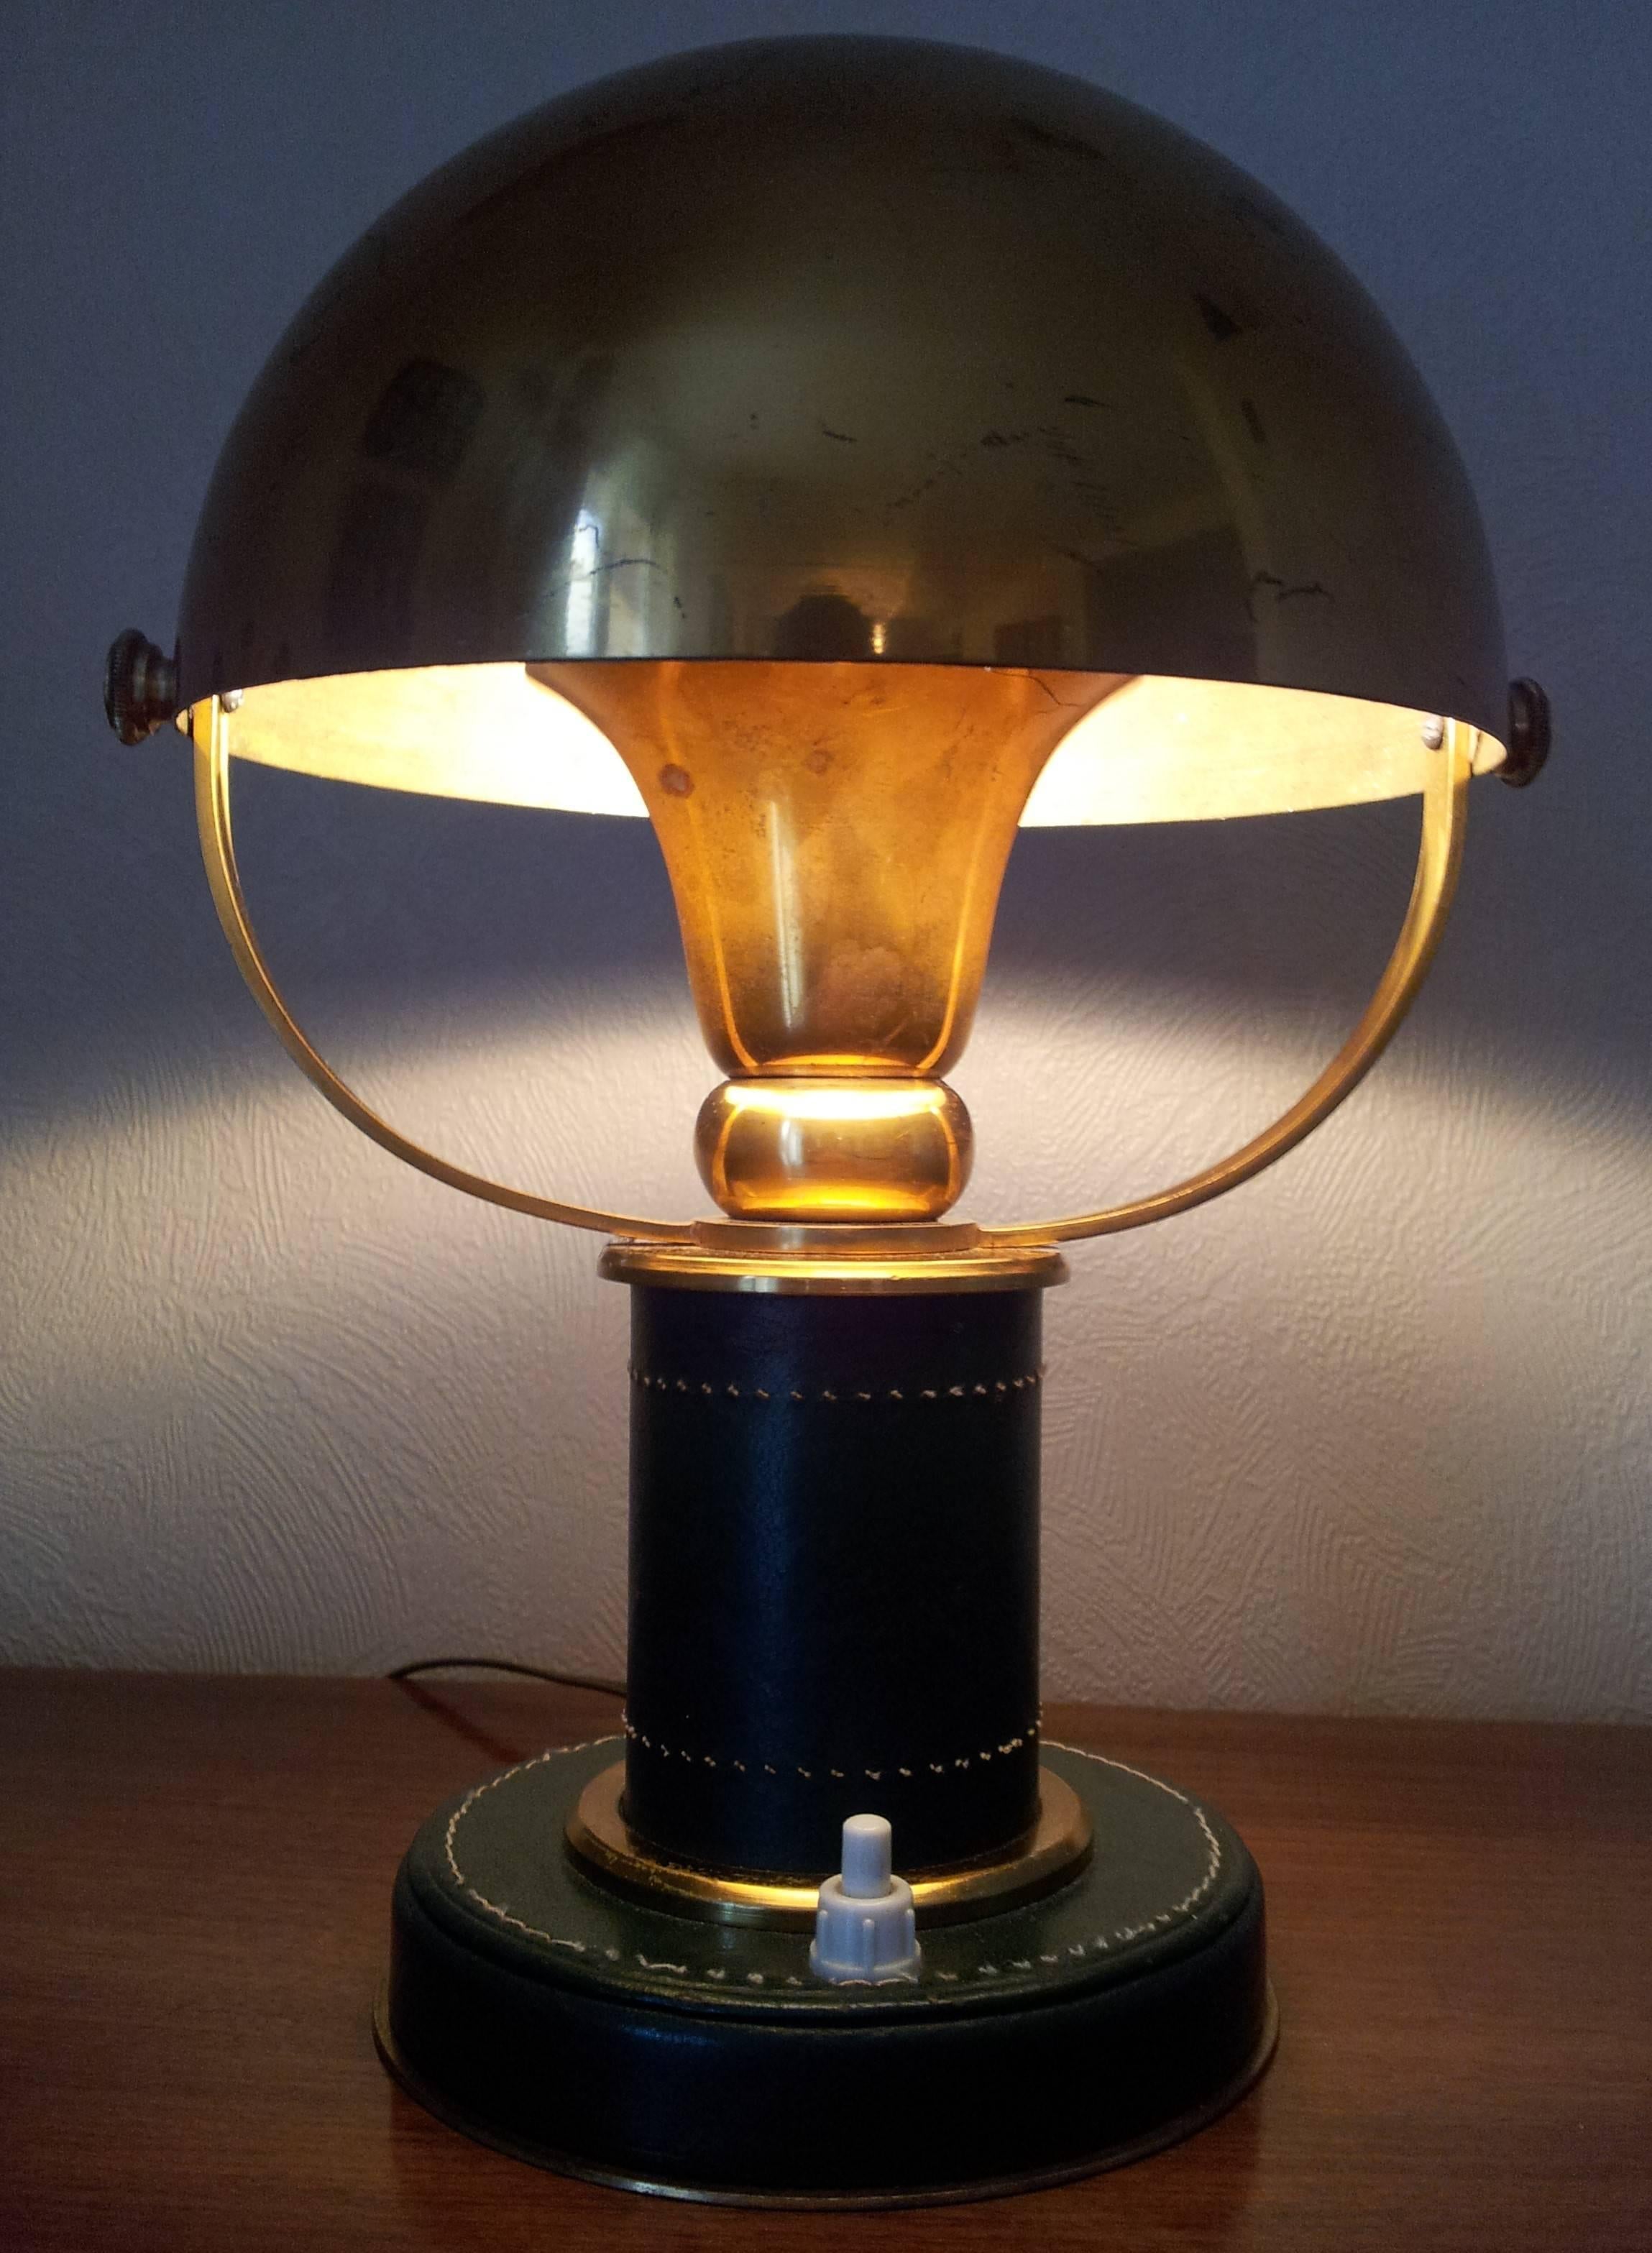 Discounted price especially for Christmas.
Modernist table lamp with a brass hemispherical orientable deflector.
Cylindrical base covered in green saddle stitched leather.
Typical model of the Art Deco period
Beautiful patina on the brass with some